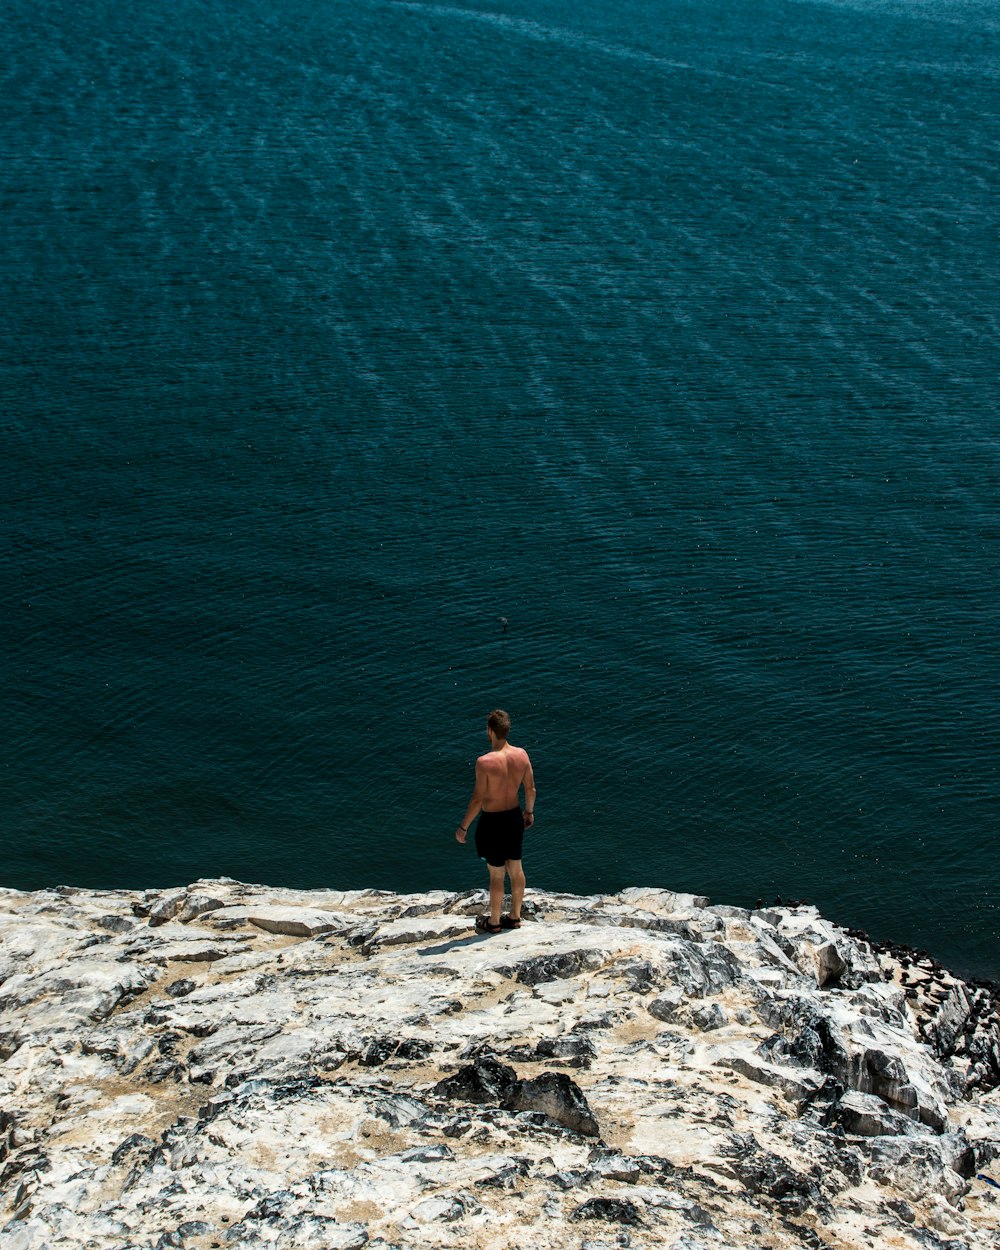 person standing on edge of a cliff over looking body of water